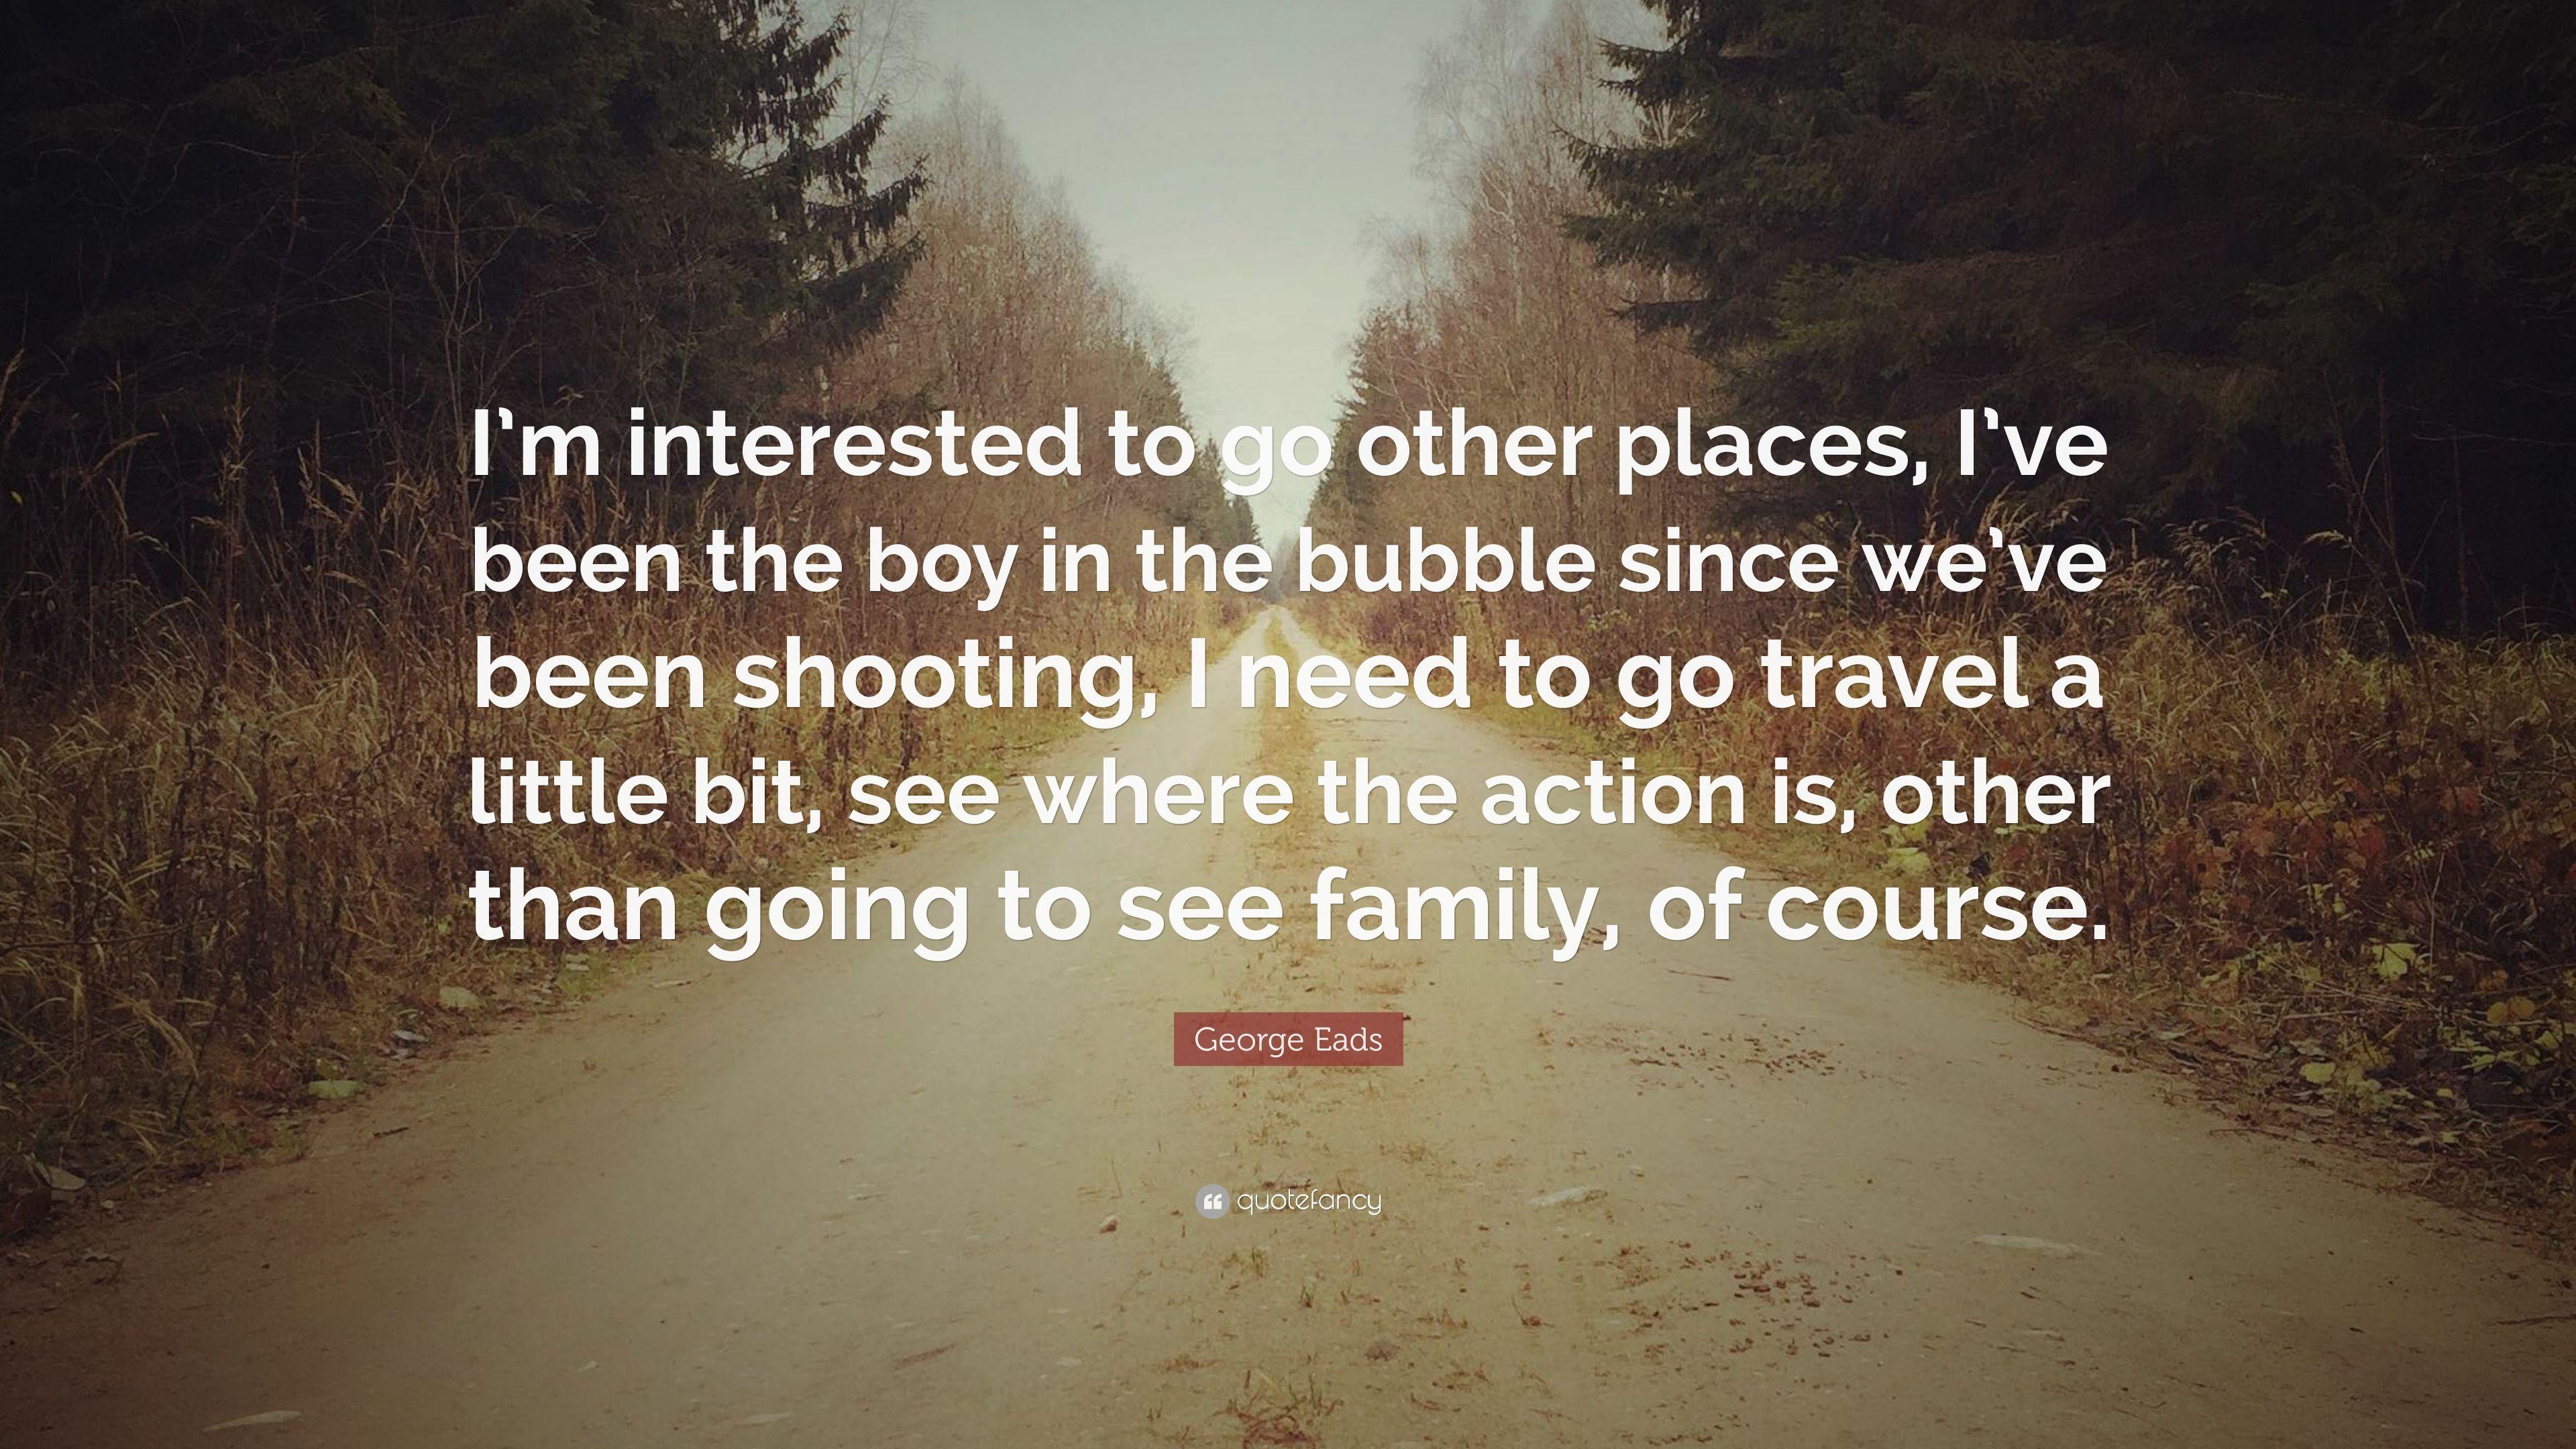 George Eads Quote: “I'm interested to go other places, I've been